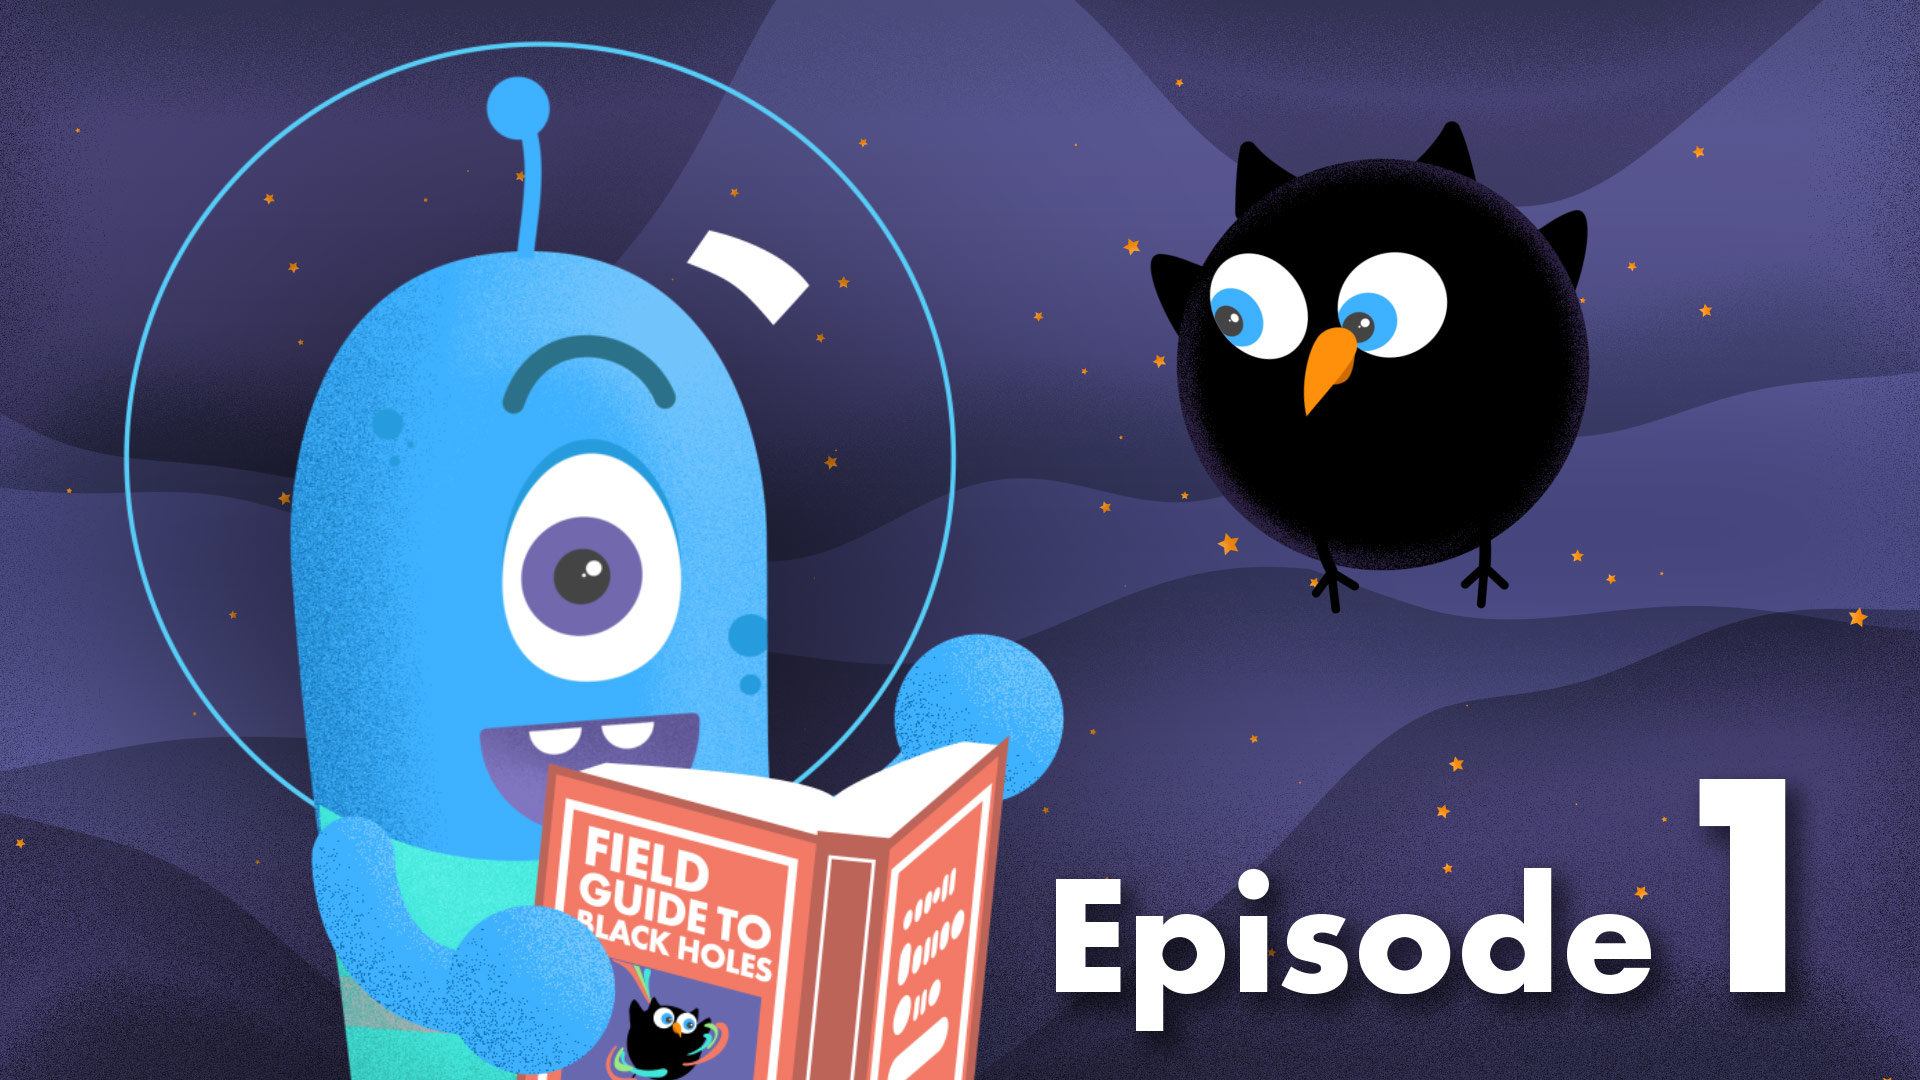 Video thumbnail with a blue cartoon figure holding binoculars and a black bird representing a black hole in the background.